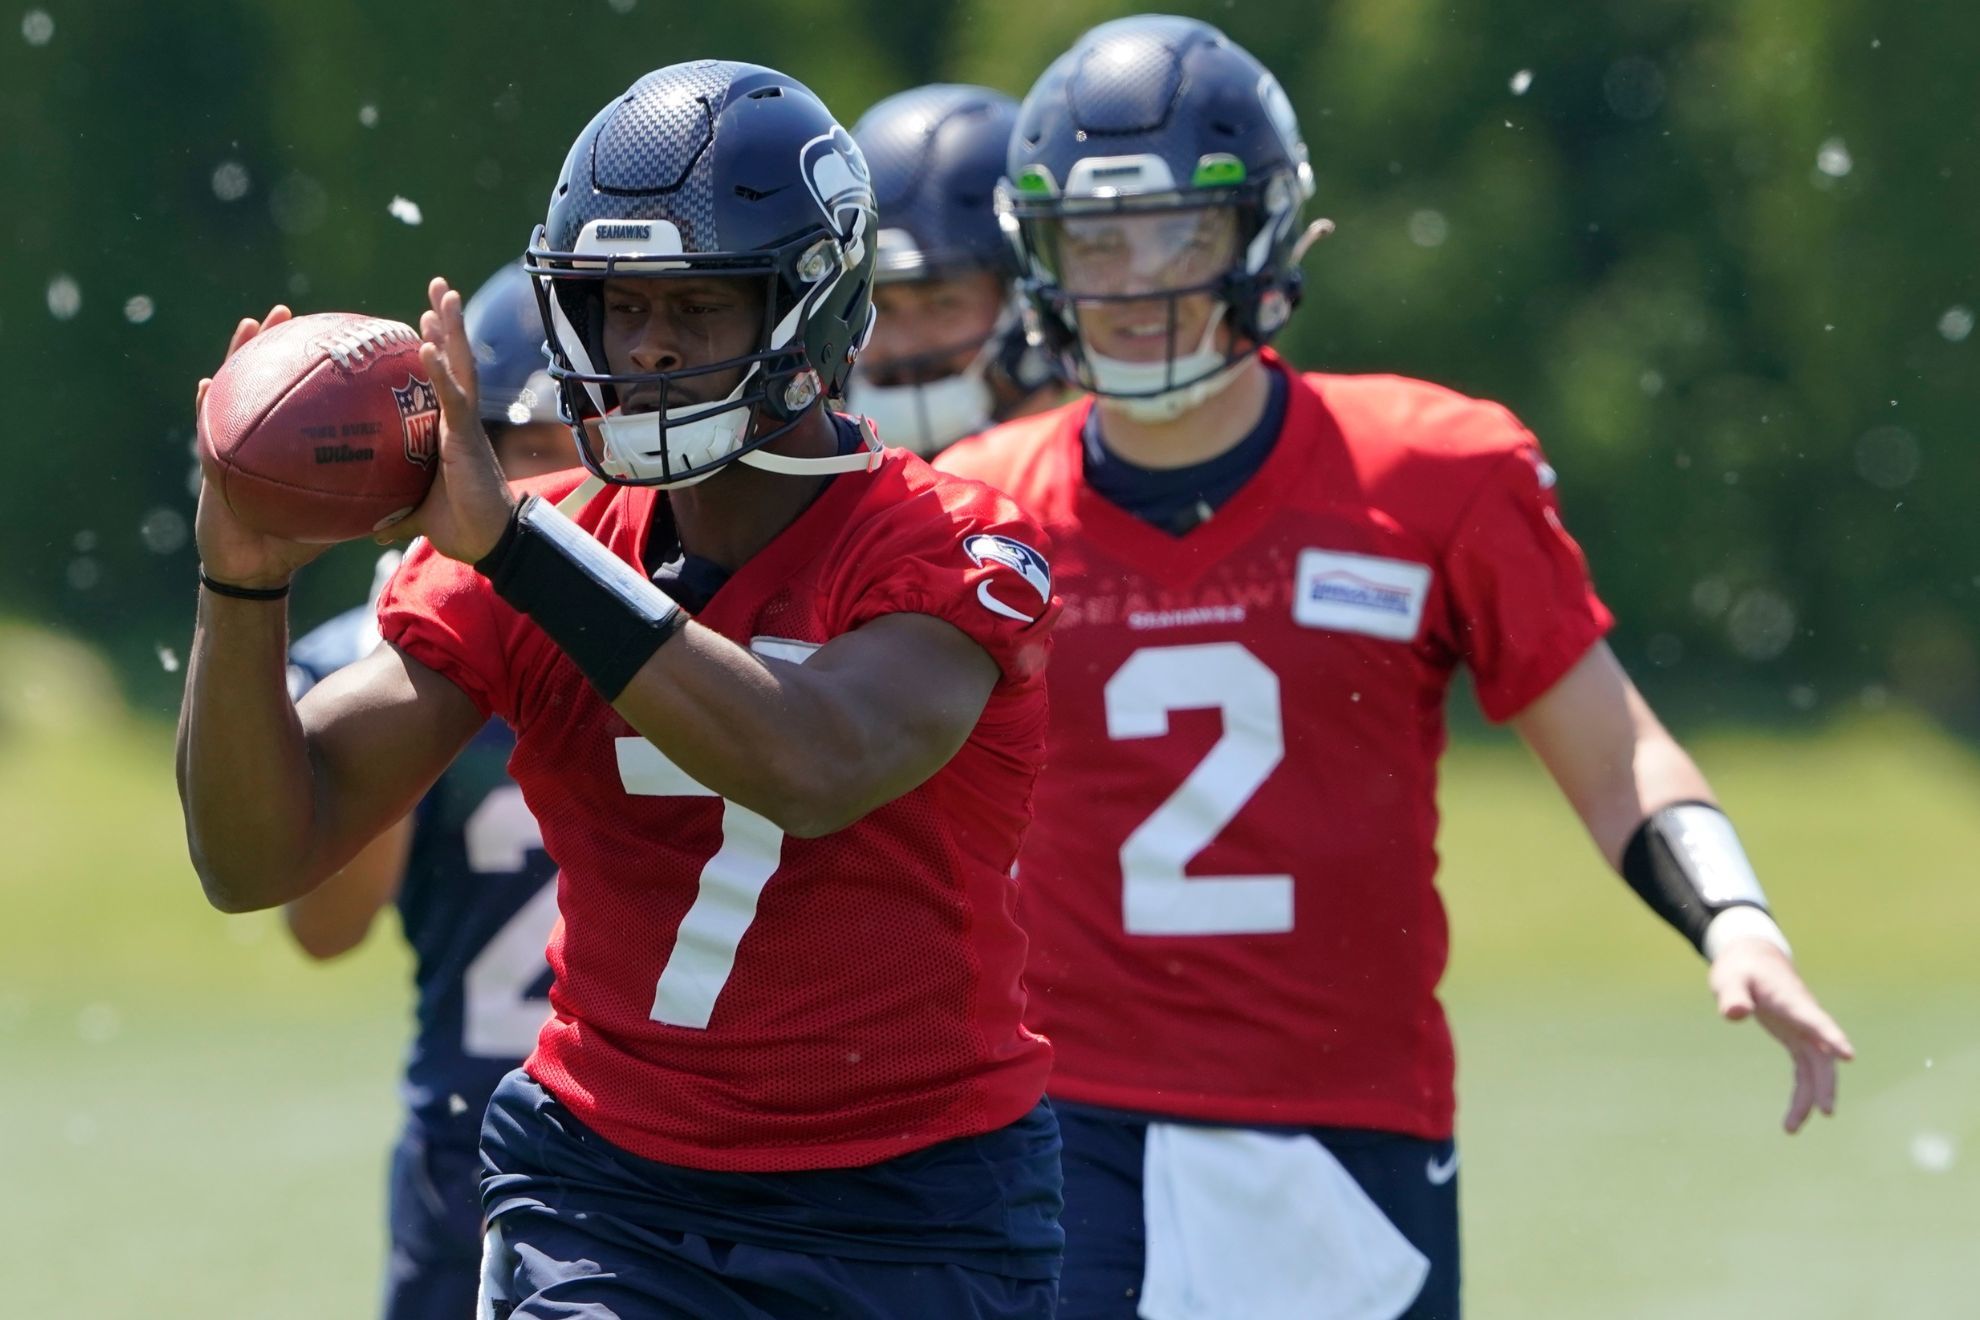 Why is Drew Lock starting at QB over Geno Smith for Seahawks vs. Eagles?